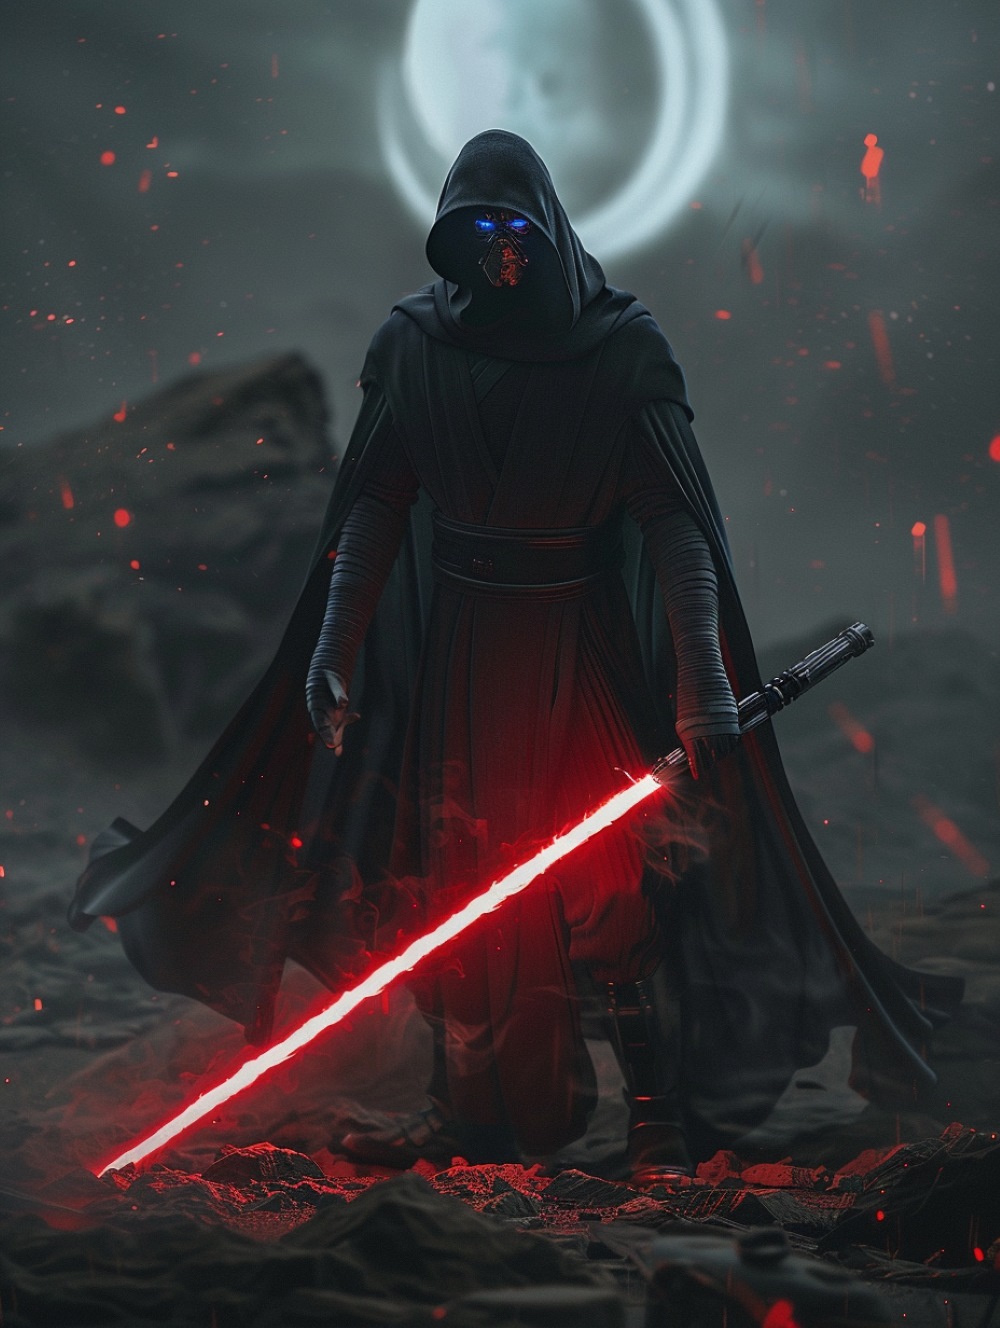 Darth Vectivus is holding a red lightsaber